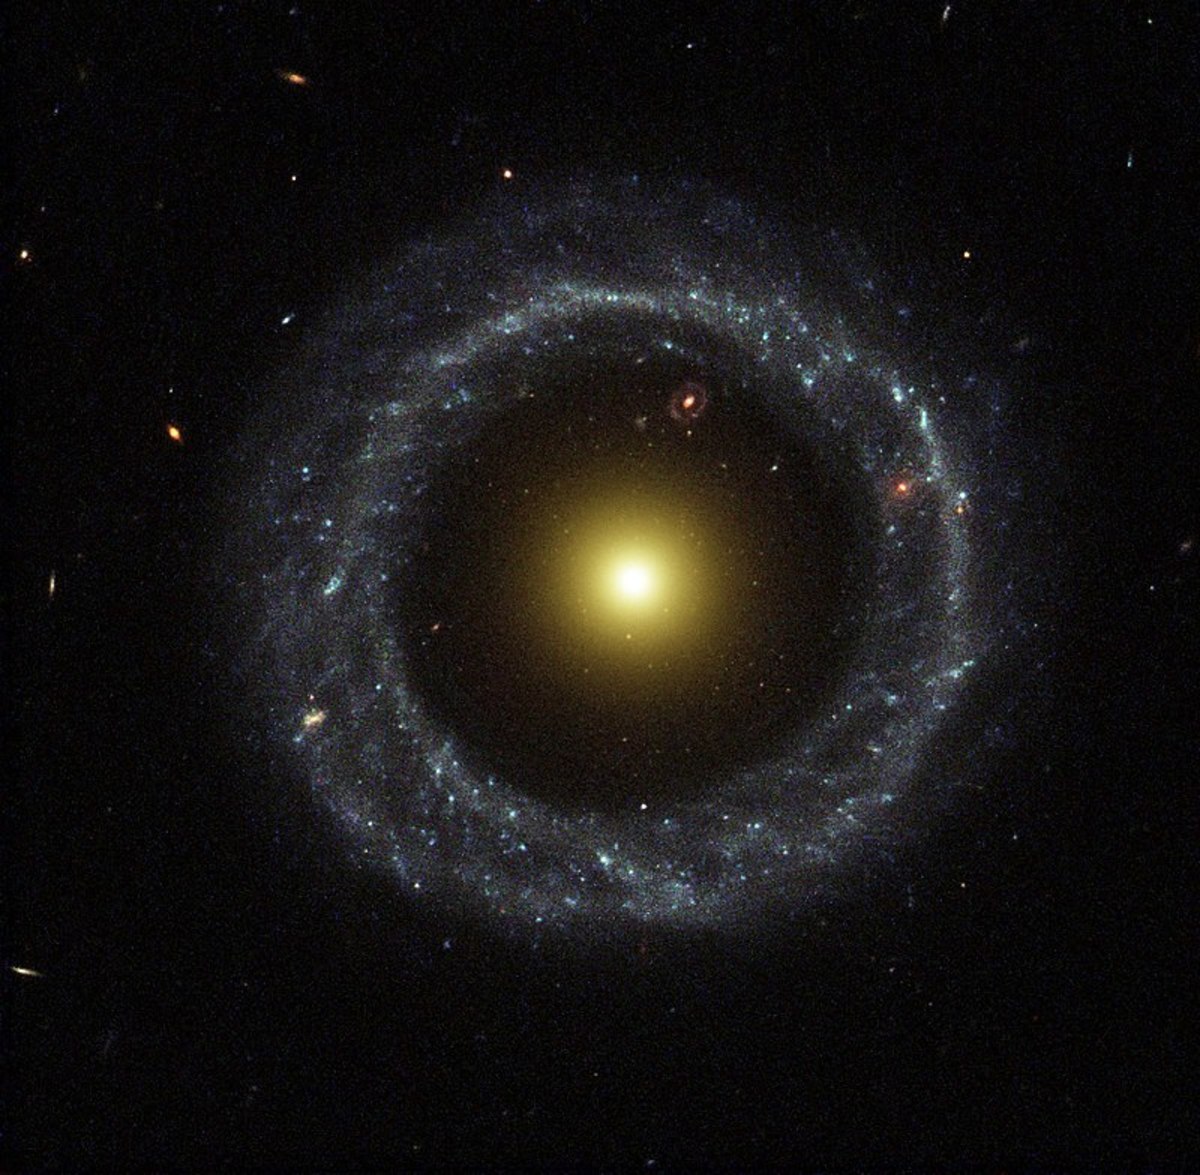 Image from the Hubble Space Telescope of the ring galaxy known as Hoag's Object